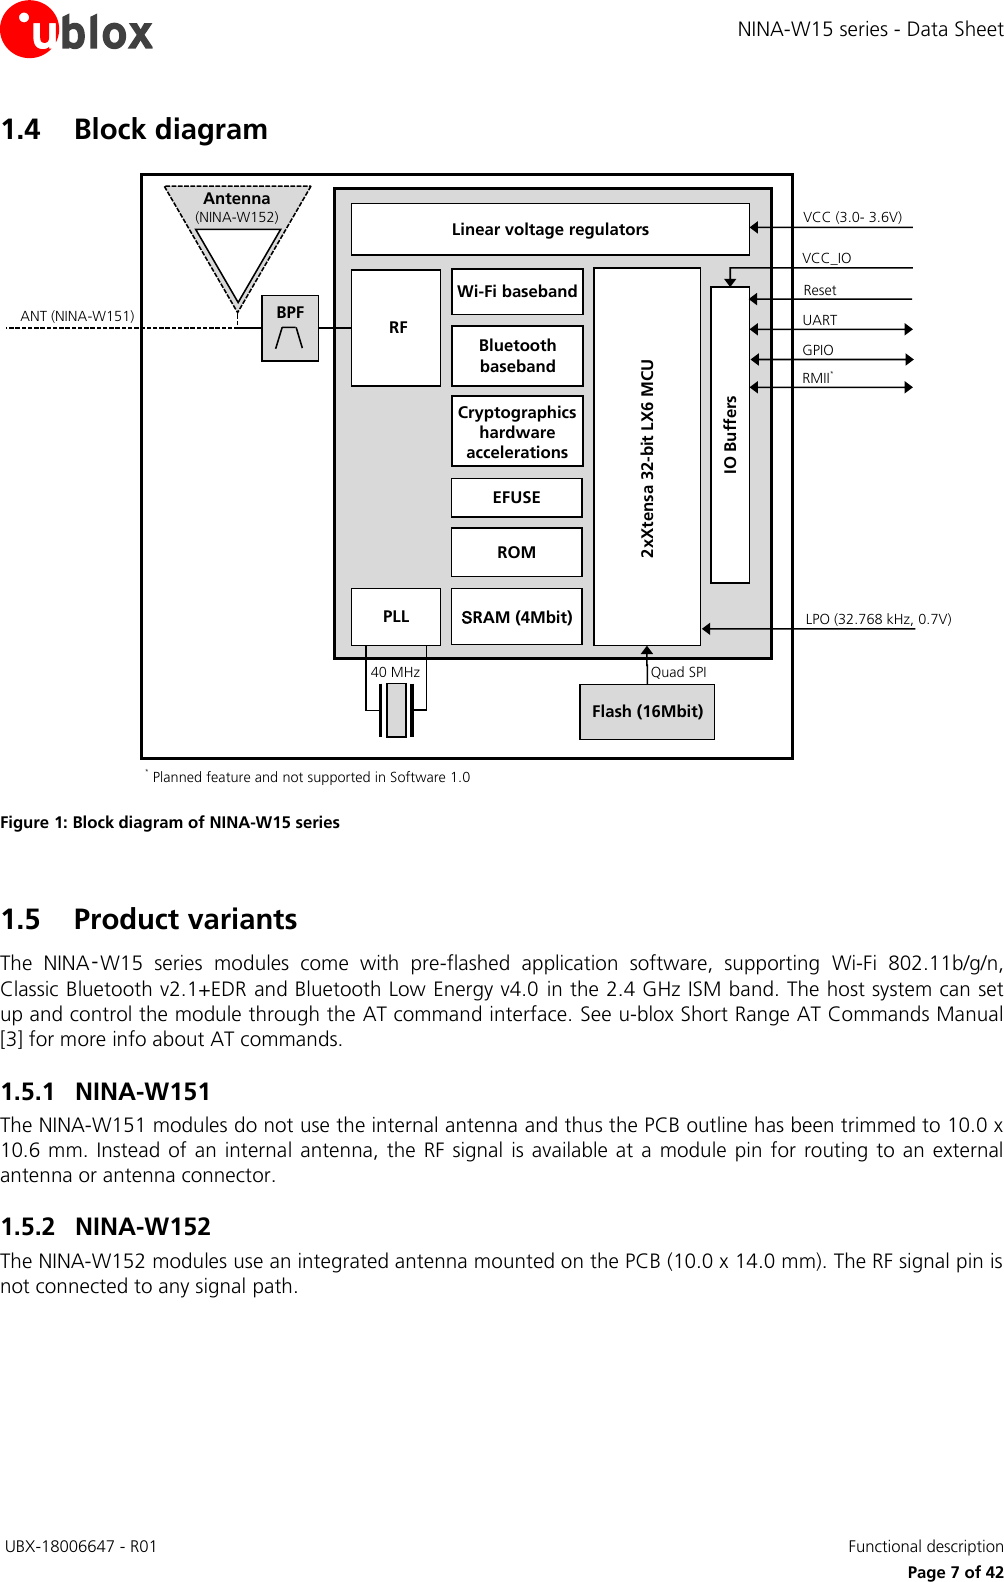 NINA-W15 series - Data Sheet  UBX-18006647 - R01   Functional description     Page 7 of 42 1.4 Block diagram   Figure 1: Block diagram of NINA-W15 series  1.5 Product variants The  NINA‑W15  series  modules  come  with  pre-flashed  application  software,  supporting  Wi-Fi  802.11b/g/n, Classic Bluetooth v2.1+EDR and Bluetooth Low Energy v4.0 in the 2.4 GHz ISM band. The host system can set up and control the module through the AT command interface. See u-blox Short Range AT Commands Manual [3] for more info about AT commands. 1.5.1 NINA-W151 The NINA-W151 modules do not use the internal antenna and thus the PCB outline has been trimmed to 10.0 x 10.6 mm. Instead of  an internal antenna, the  RF signal  is available at a  module pin  for routing to an  external antenna or antenna connector. 1.5.2 NINA-W152 The NINA-W152 modules use an integrated antenna mounted on the PCB (10.0 x 14.0 mm). The RF signal pin is not connected to any signal path.   Flash (16Mbit) Linear voltage regulators  RF ROM Wi-Fi baseband IO Buffers 2xXtensa 32-bit LX6 MCU  SRAM (4Mbit) Cryptographics hardware accelerations  Antenna  (NINA-W152) PLL Quad SPI VCC_IO VCC (3.0- 3.6V) 40 MHz Reset UART RMII* LPO (32.768 kHz, 0.7V)   EFUSE * Planned feature and not supported in Software 1.0 GPIO BPF ANT (NINA-W151) Bluetooth baseband 